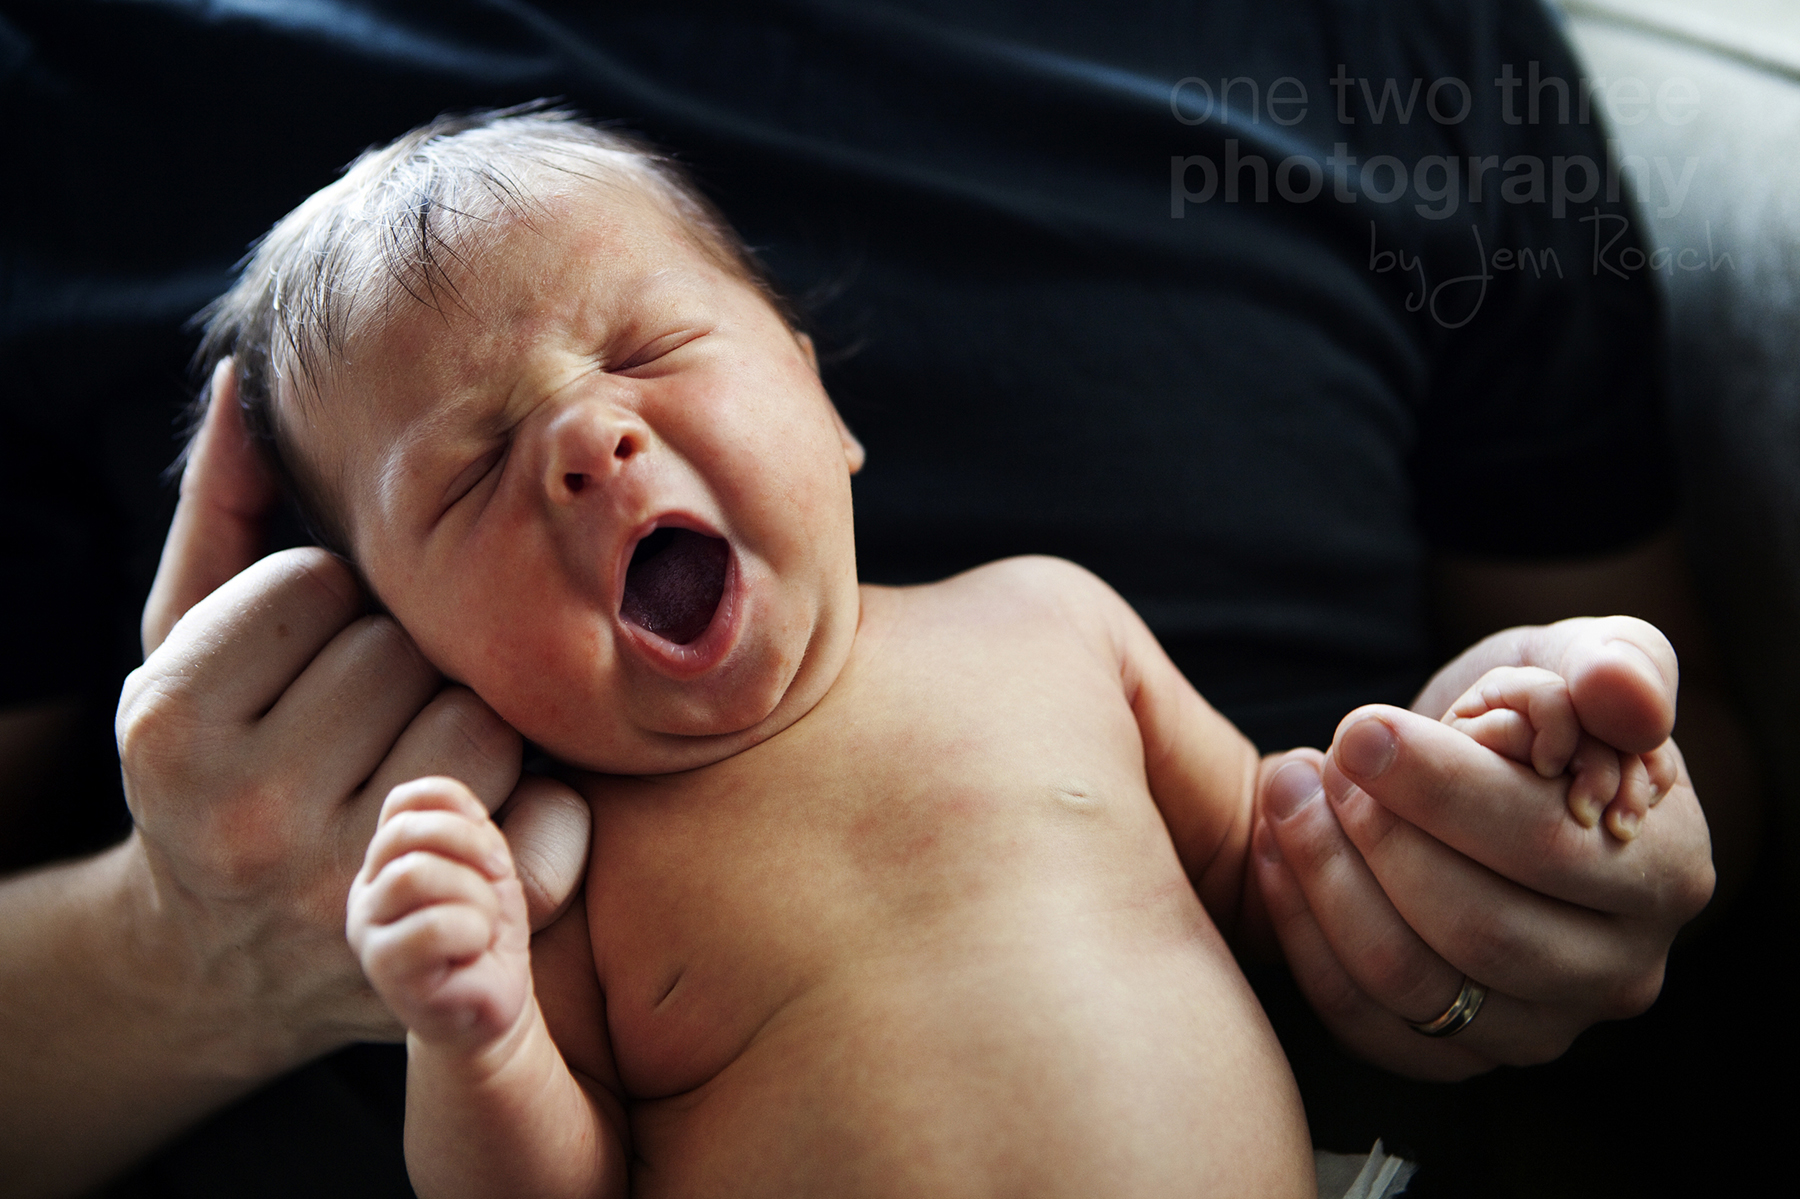 Baby Leah yawns during the photography session in the arms of her father